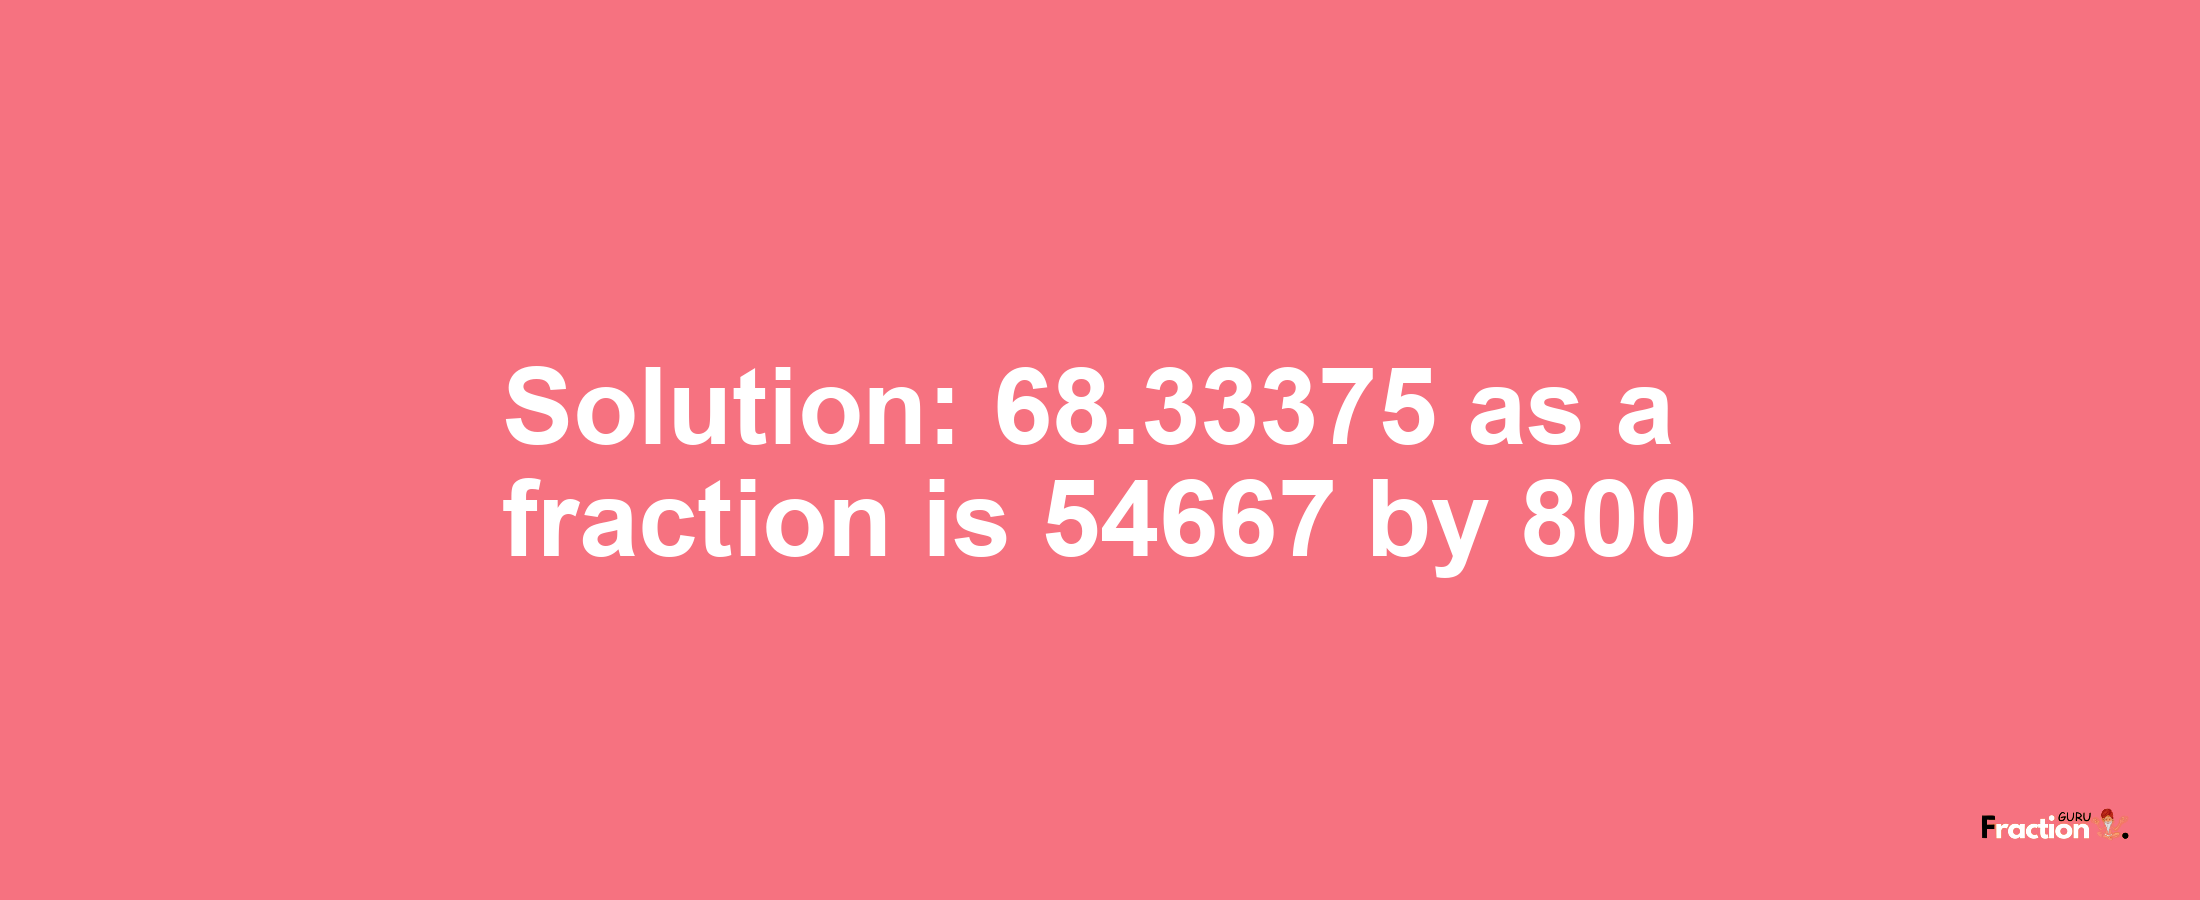 Solution:68.33375 as a fraction is 54667/800